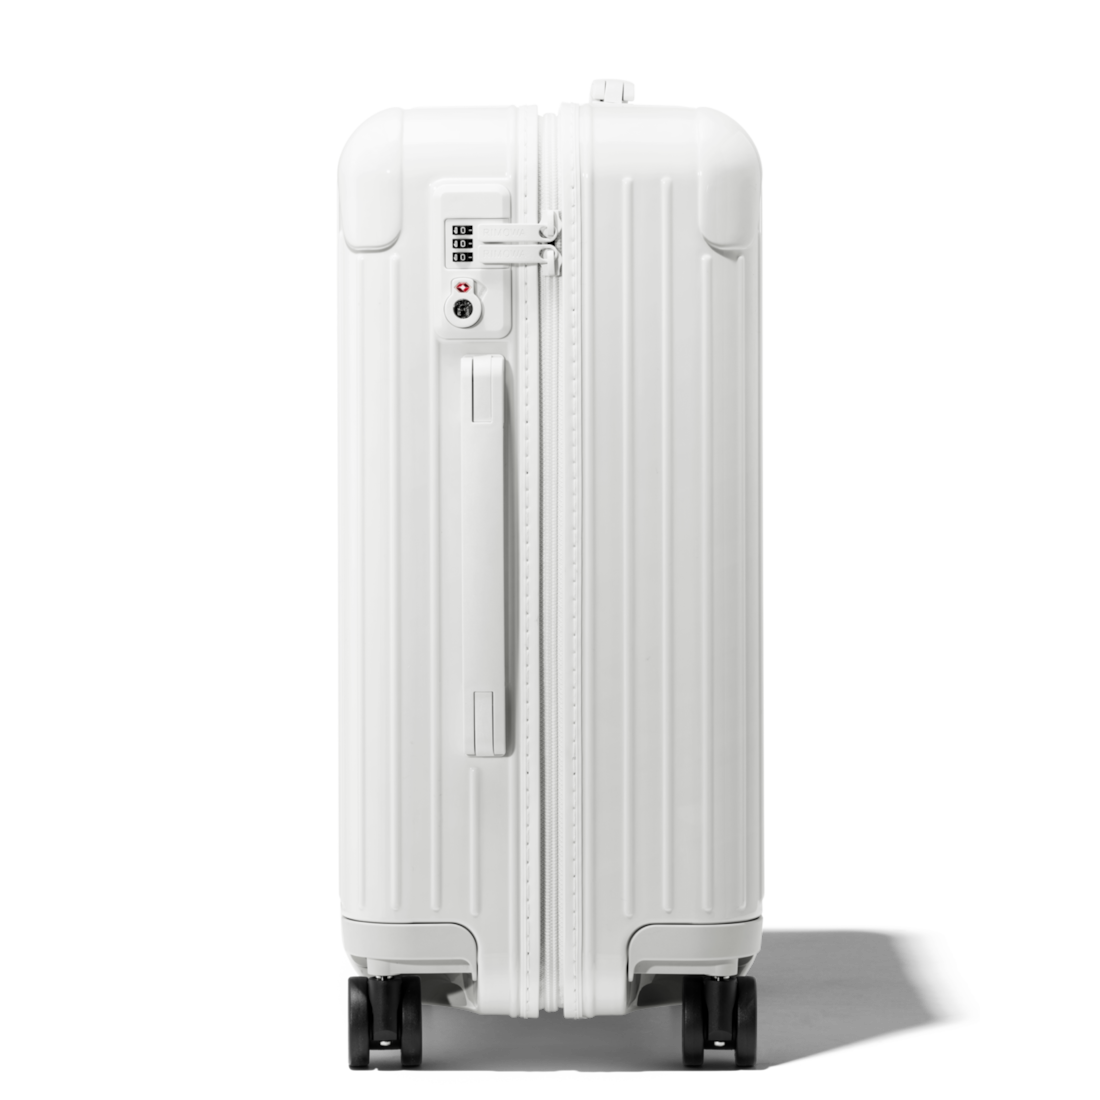 Rimowa Essential Cabin 22-inch Wheeled Carry-on In Matte Black